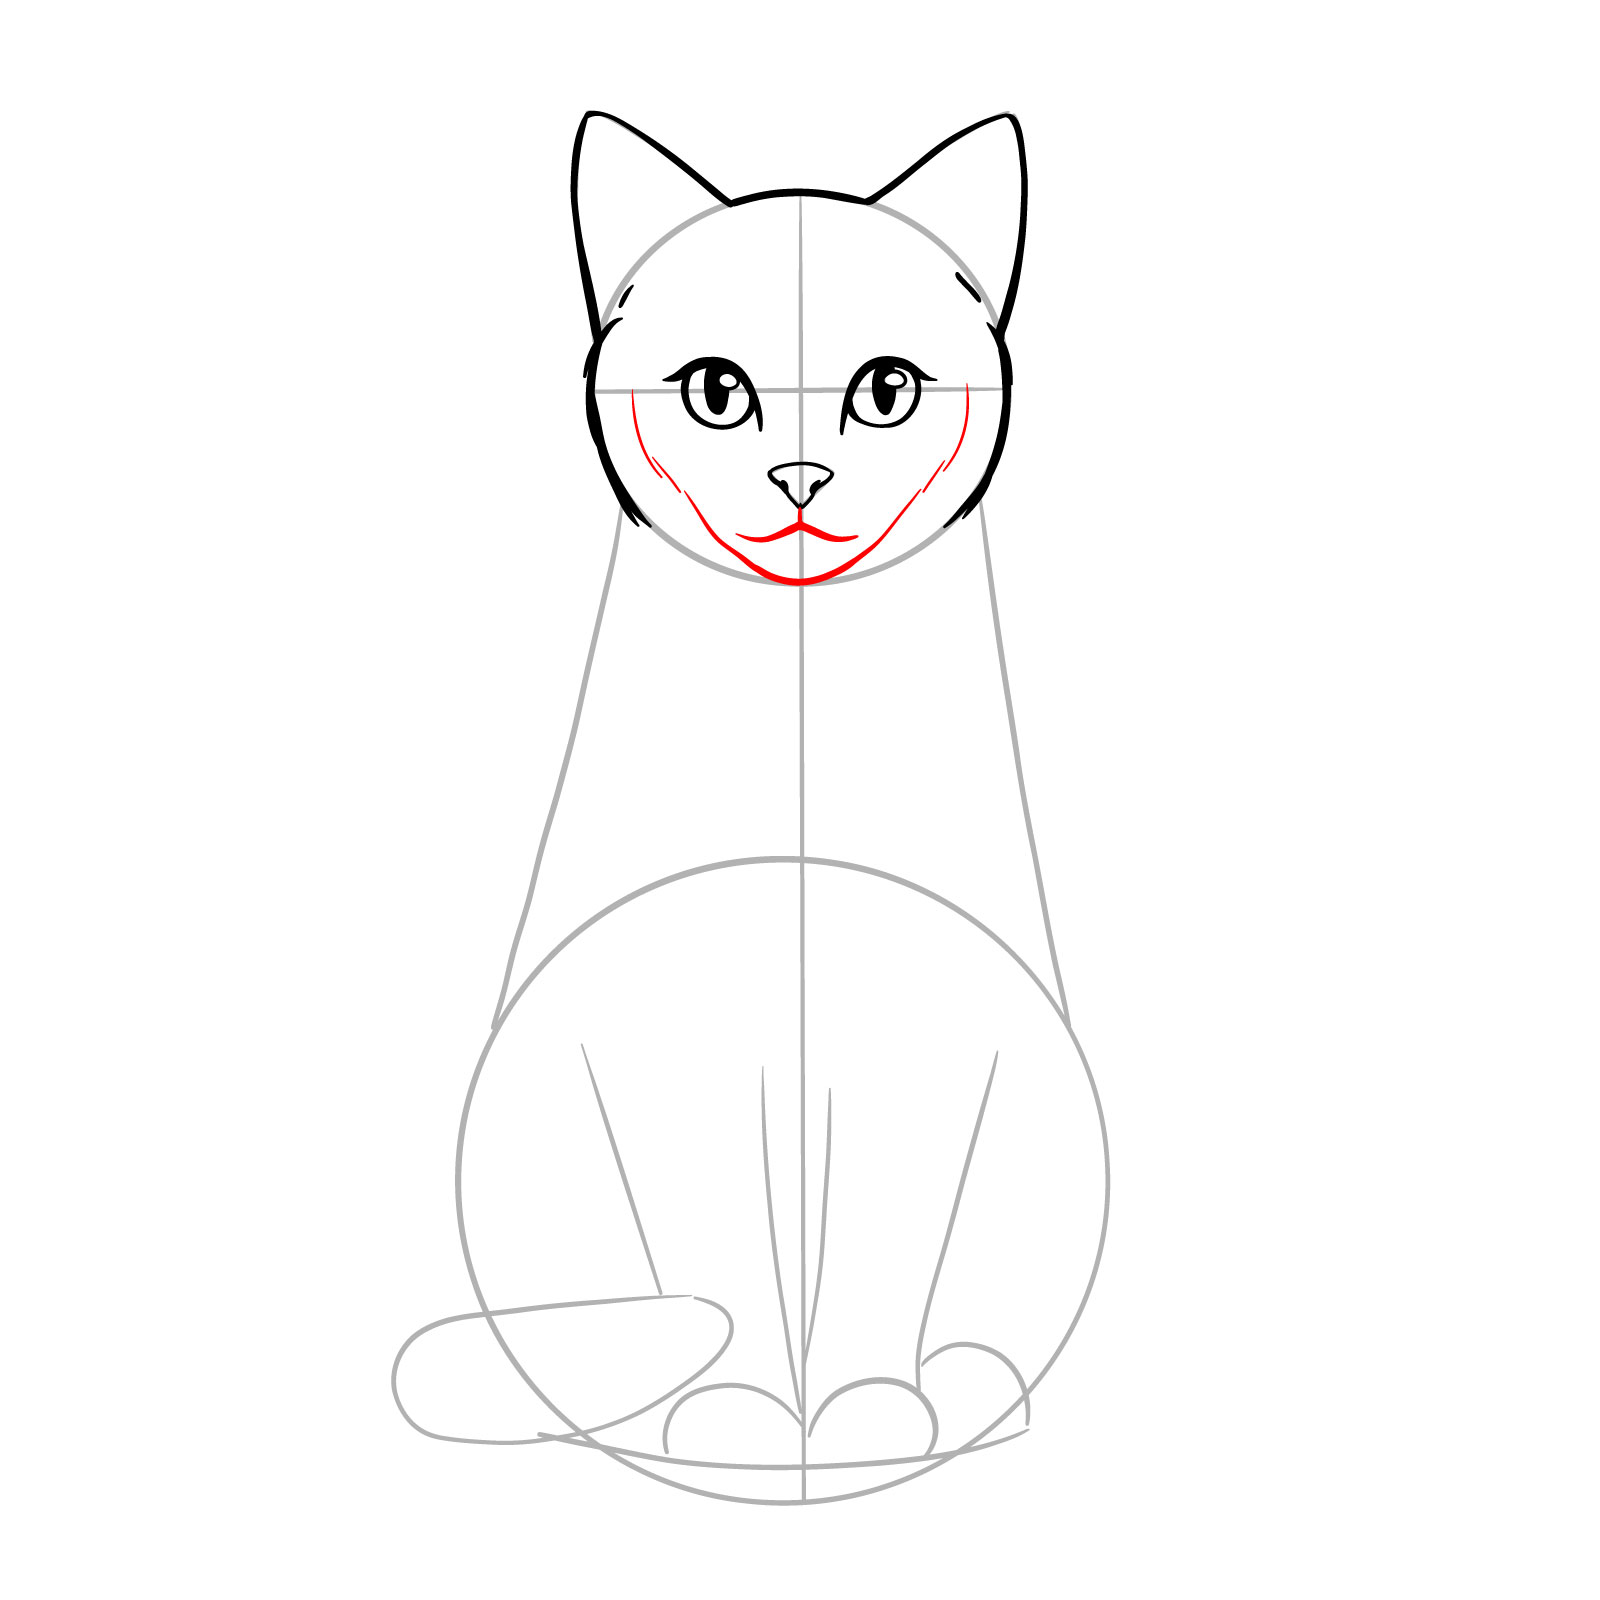 Adding mouth, chin, and whisker pads with fur texture to a sitting cat drawing - step 08